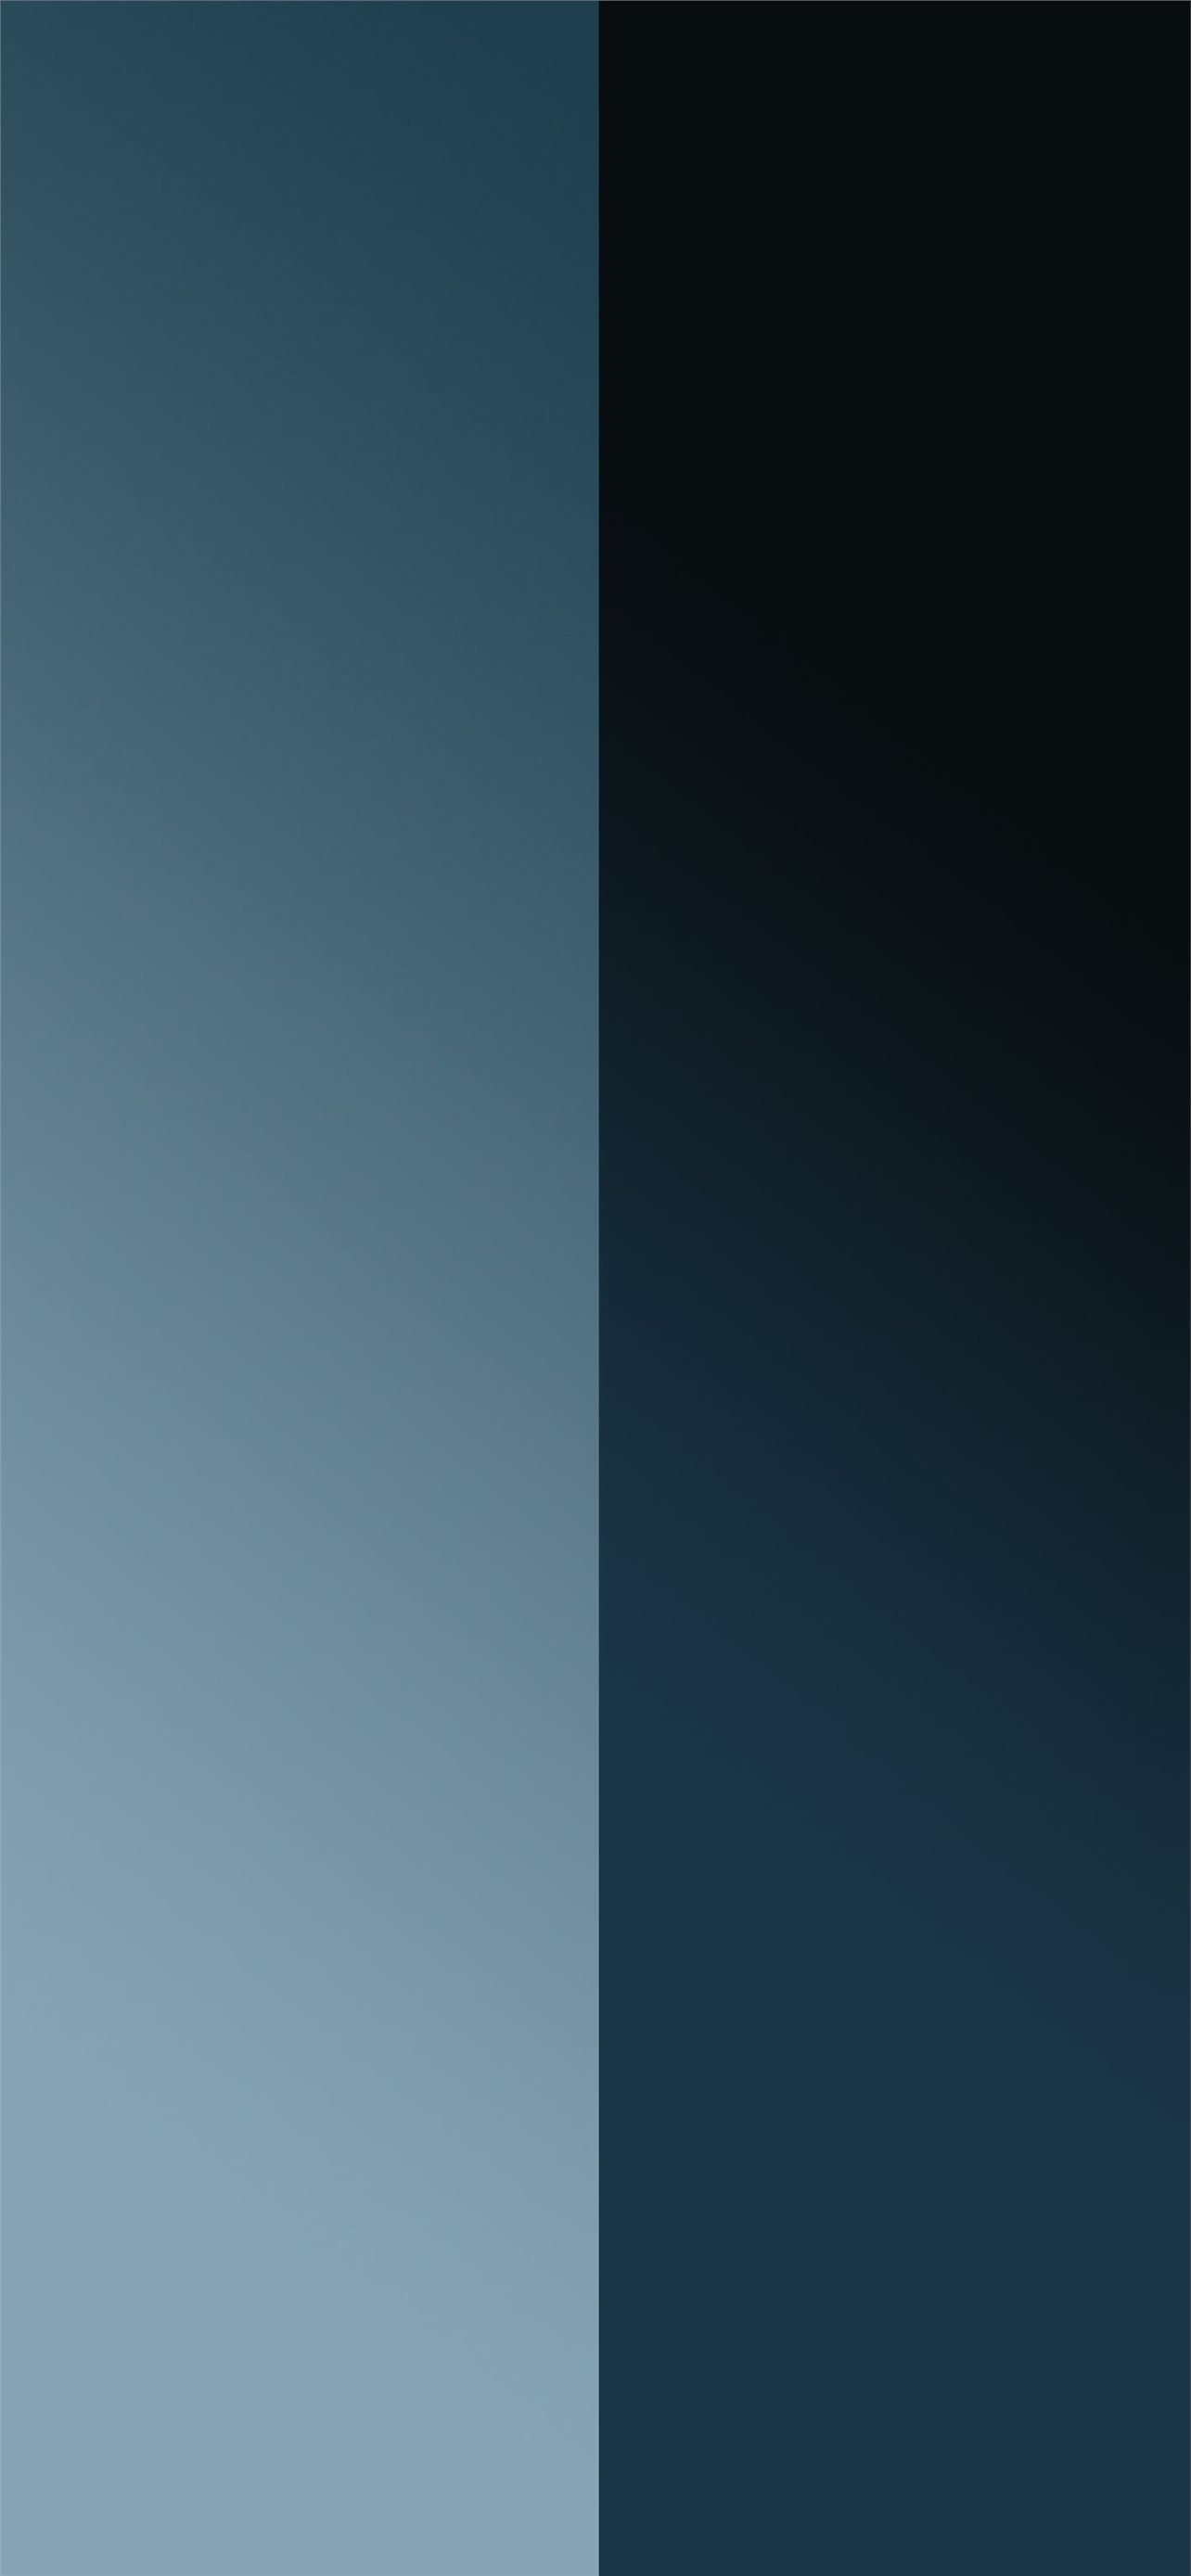 The Juxtapose Edition: A Special Wallpaper Series For iPhone - iGeeksBlog